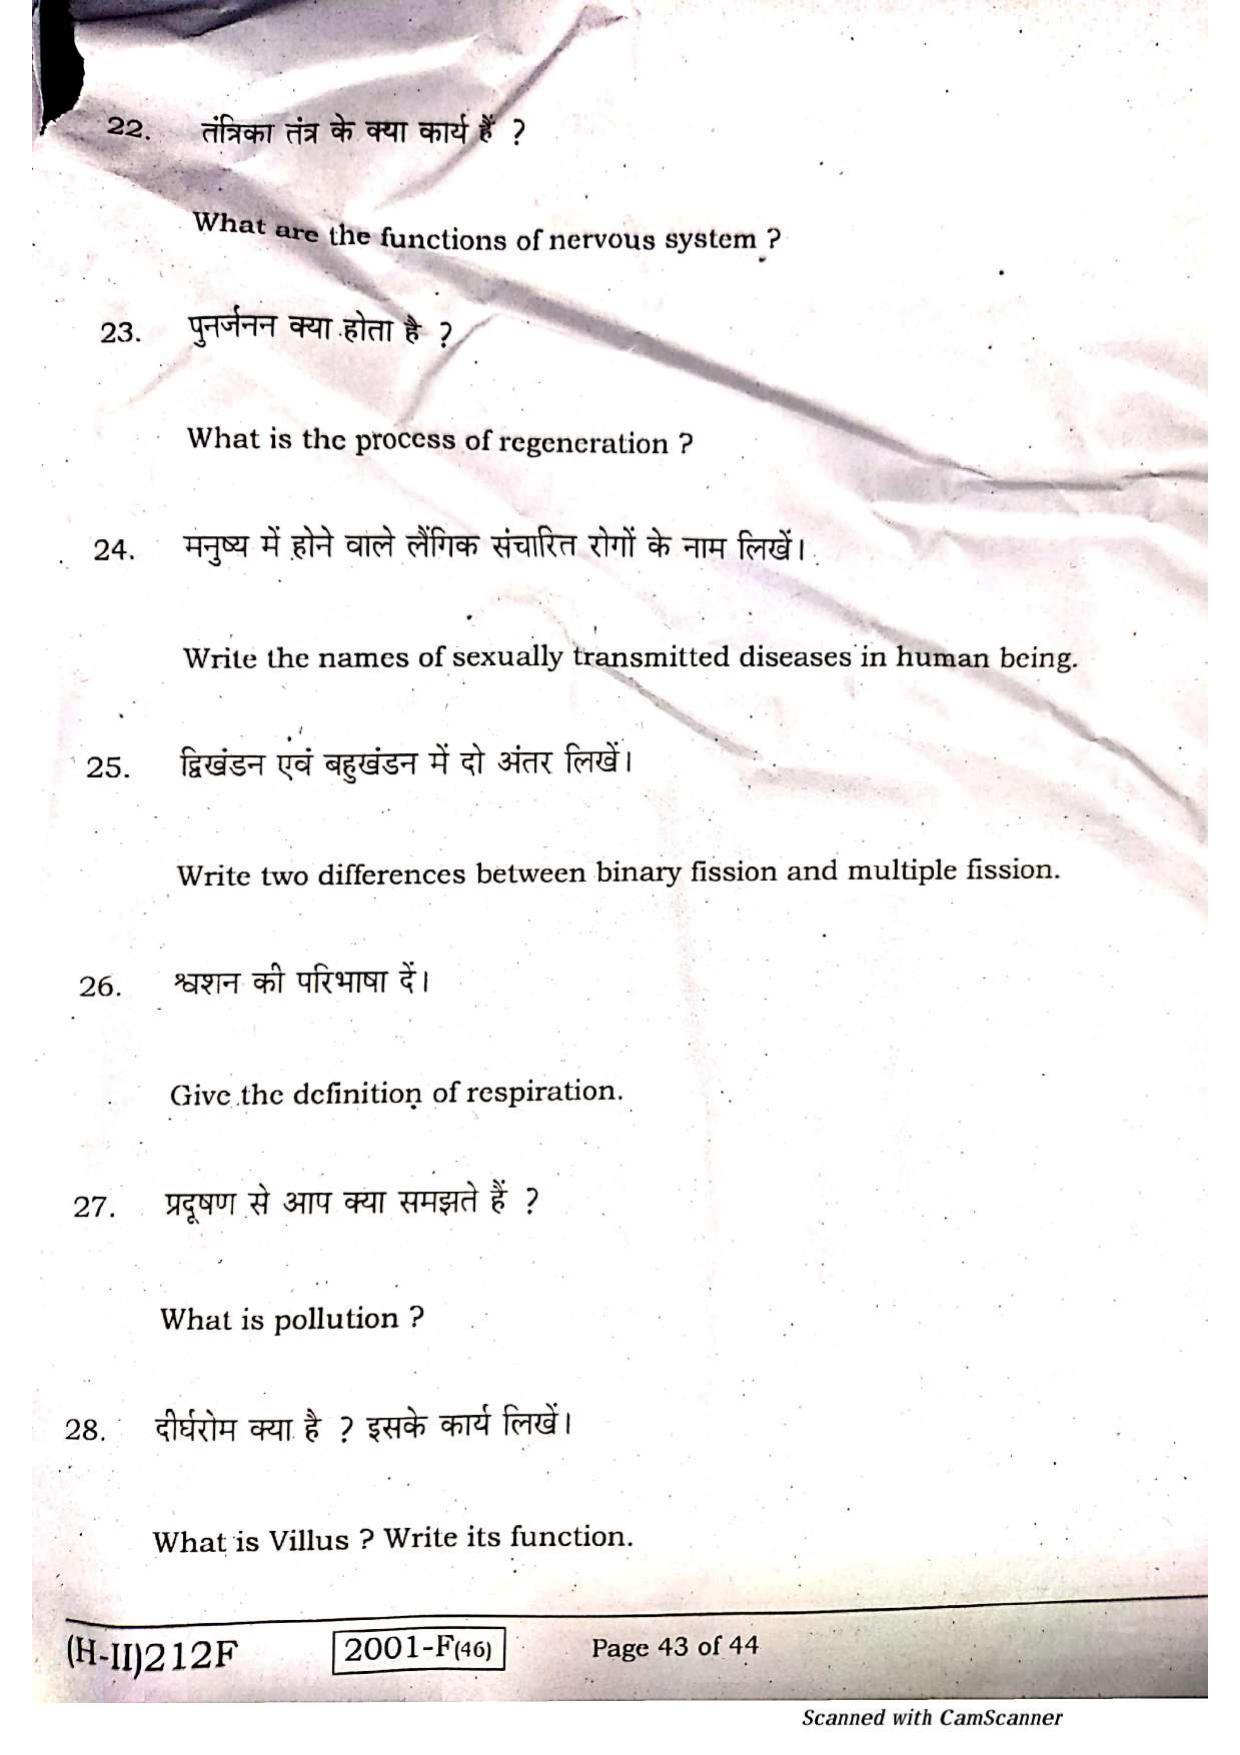 Bihar Board Class 10 Science 2021 (2nd Sitting) Question Paper - Page 41